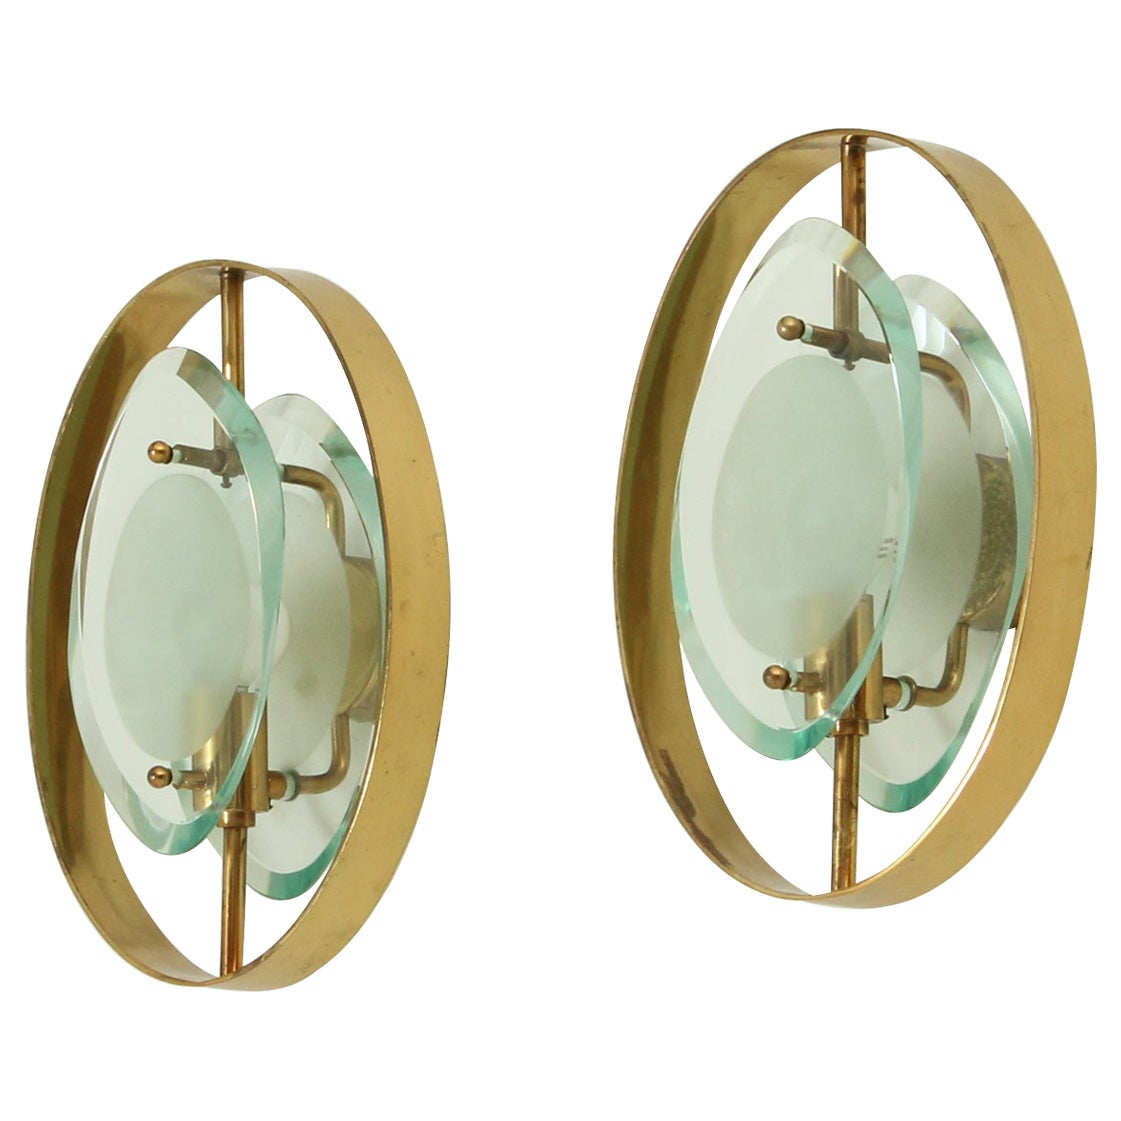 Pair of Sconces Model 2240 by Max Ingrand for Fontana Arte